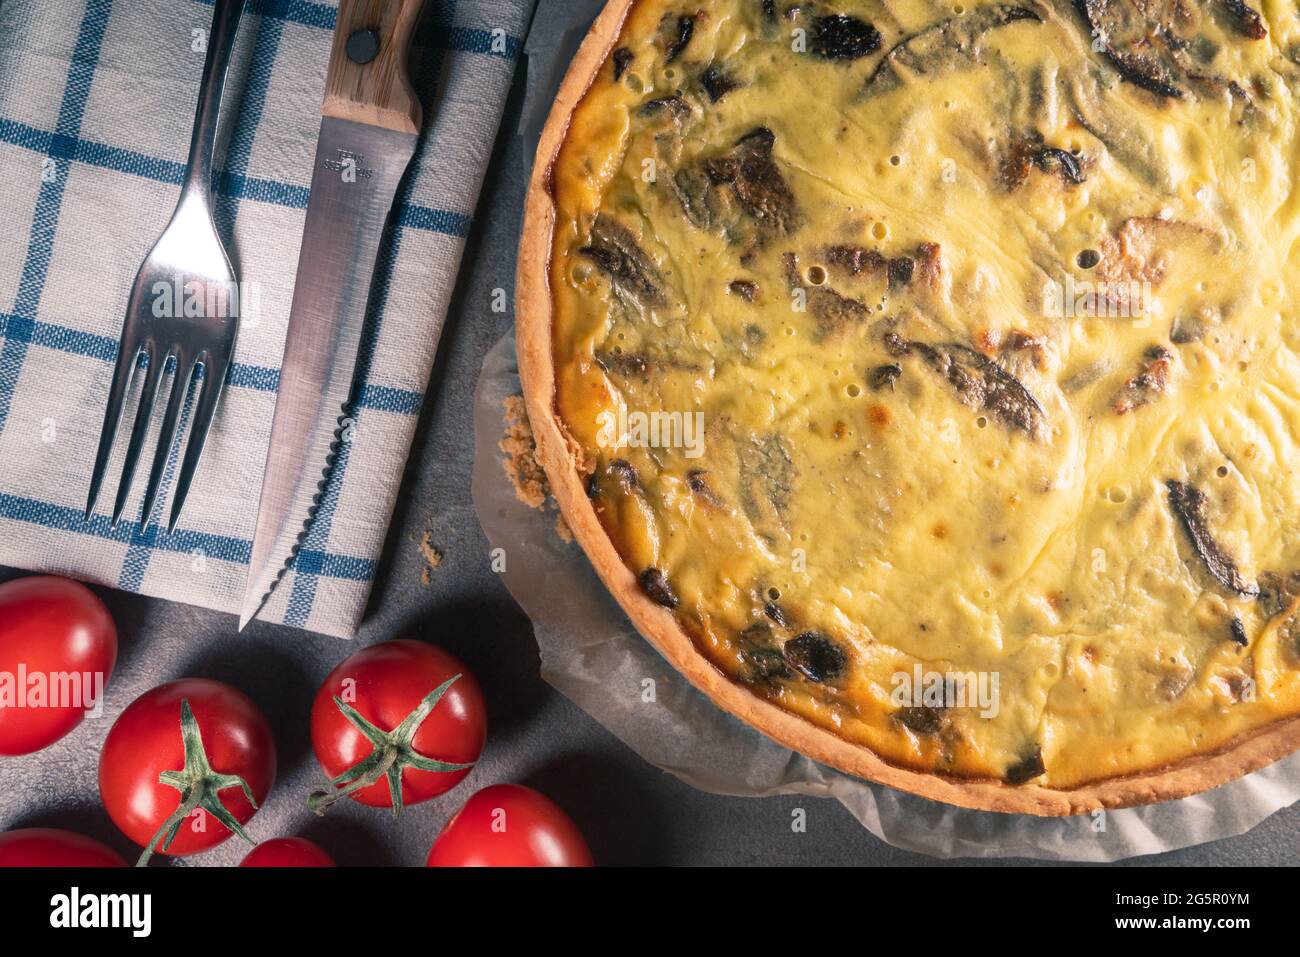 Top view of a freshly baked yellow quiche with mushrooms still on a ...